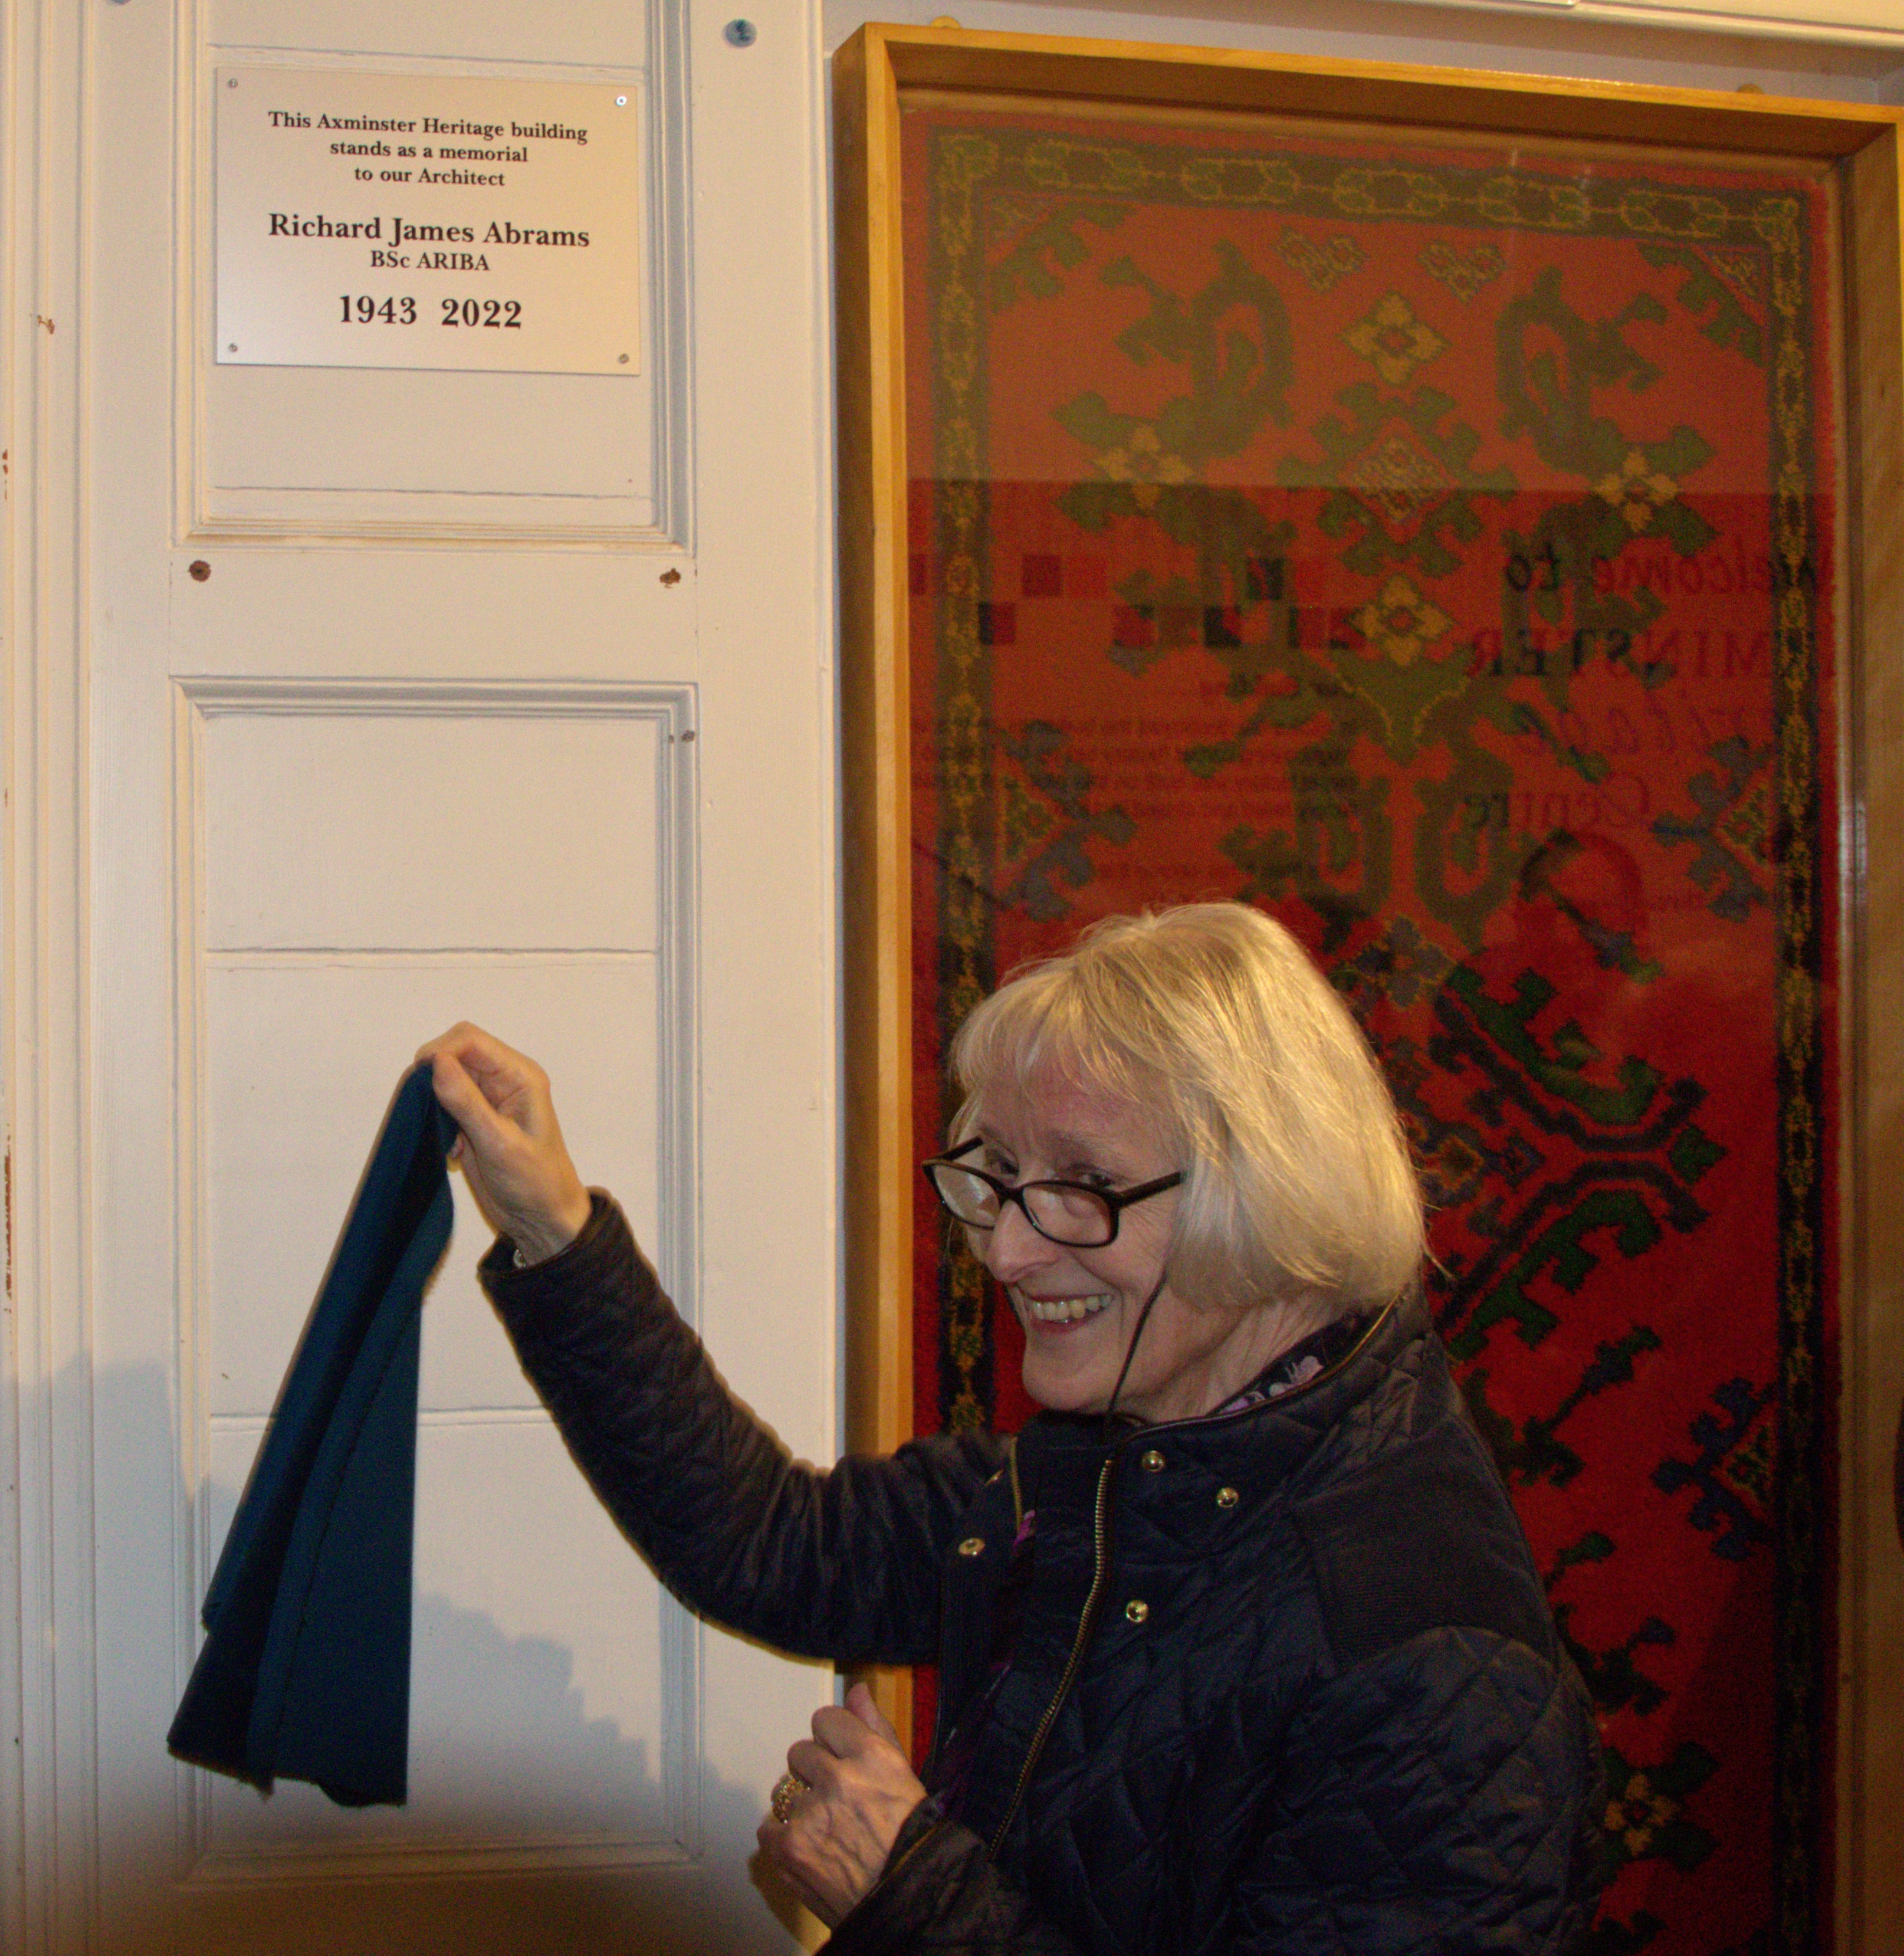 Richard Abrams' widow, Hilary Abrams, unveils her late husband's plaque at Axminster Heritage Centre